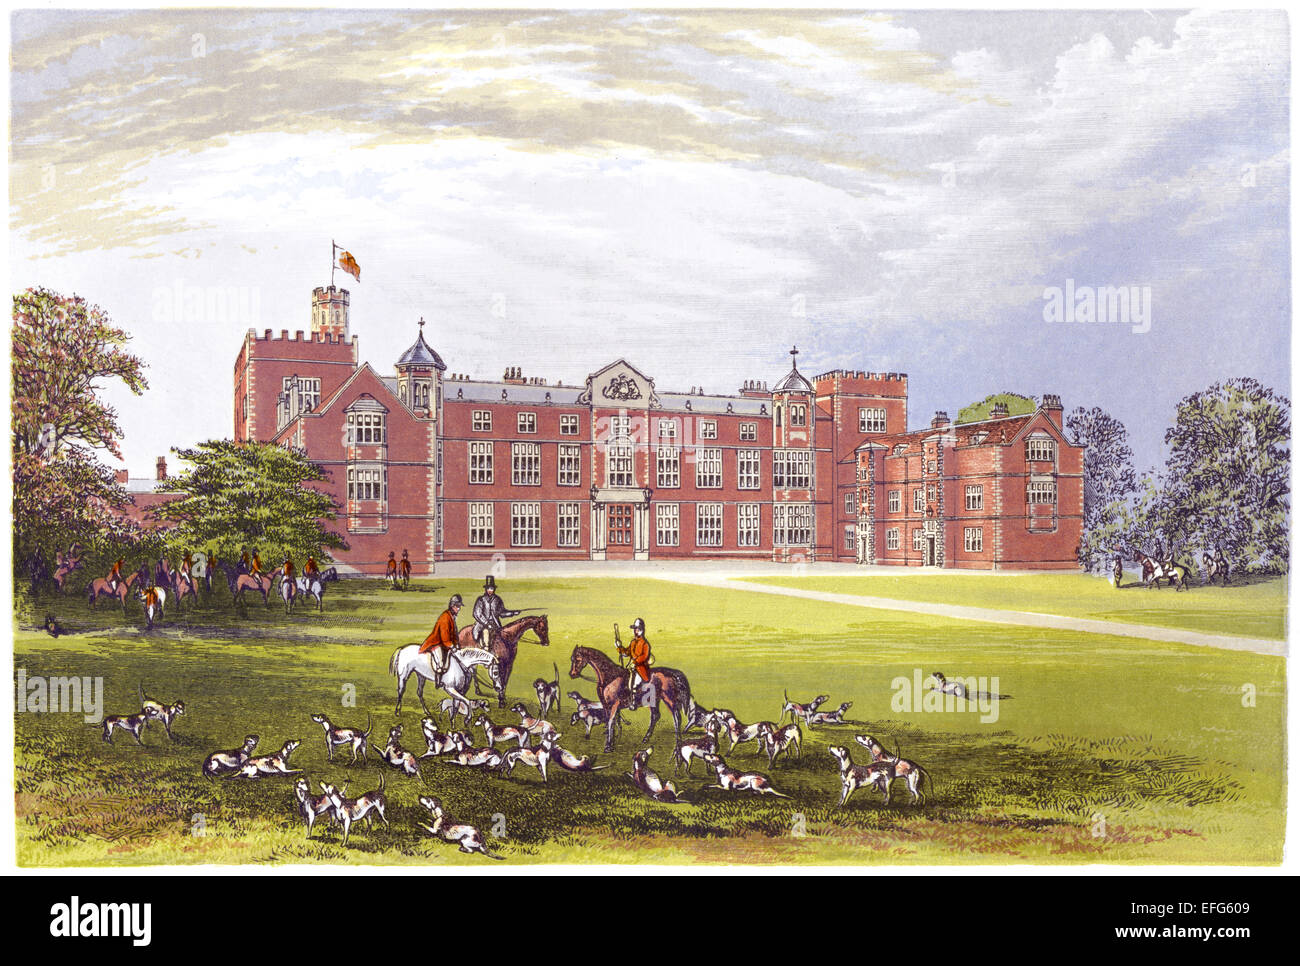 A coloured illustration of Burton Constable Hall (Skirlaugh, East Riding of Yorkshire UK) scanned at high resolution from a book printed in 1870. Stock Photo